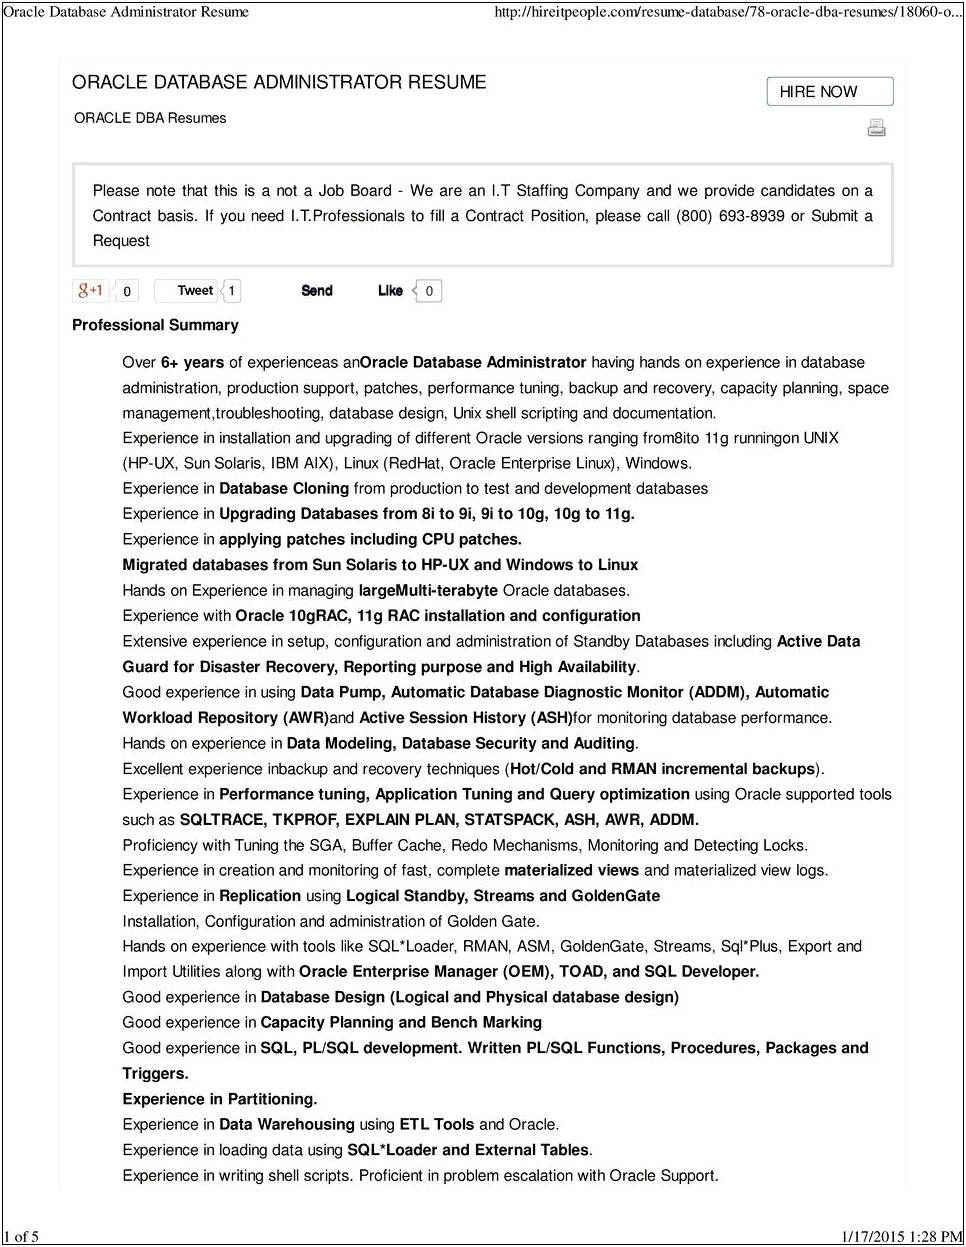 Sample Of Professional Resume For Oracle Dba